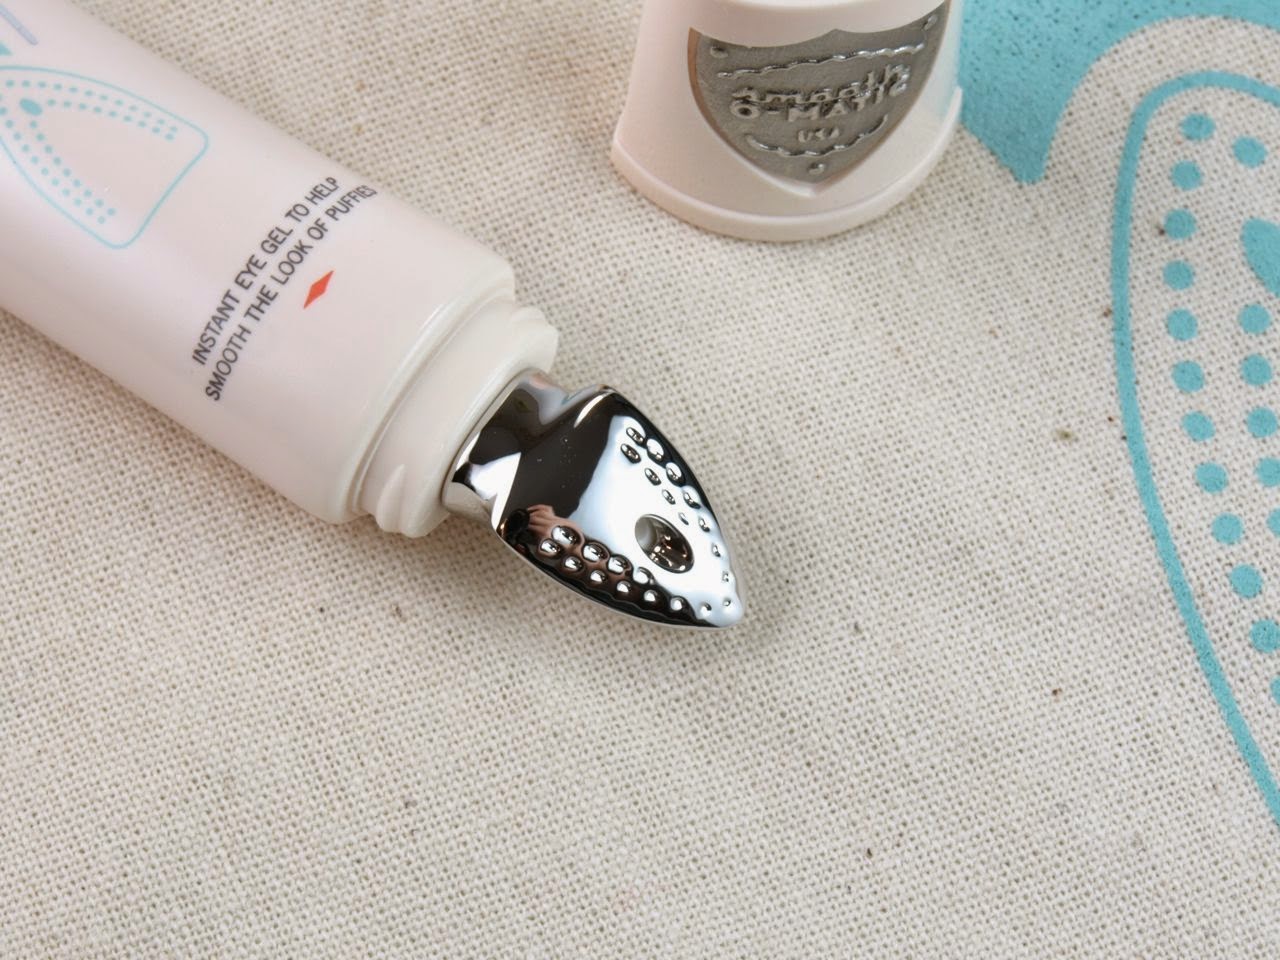 Benefit Puff Off! Instant Eye Gel: Review